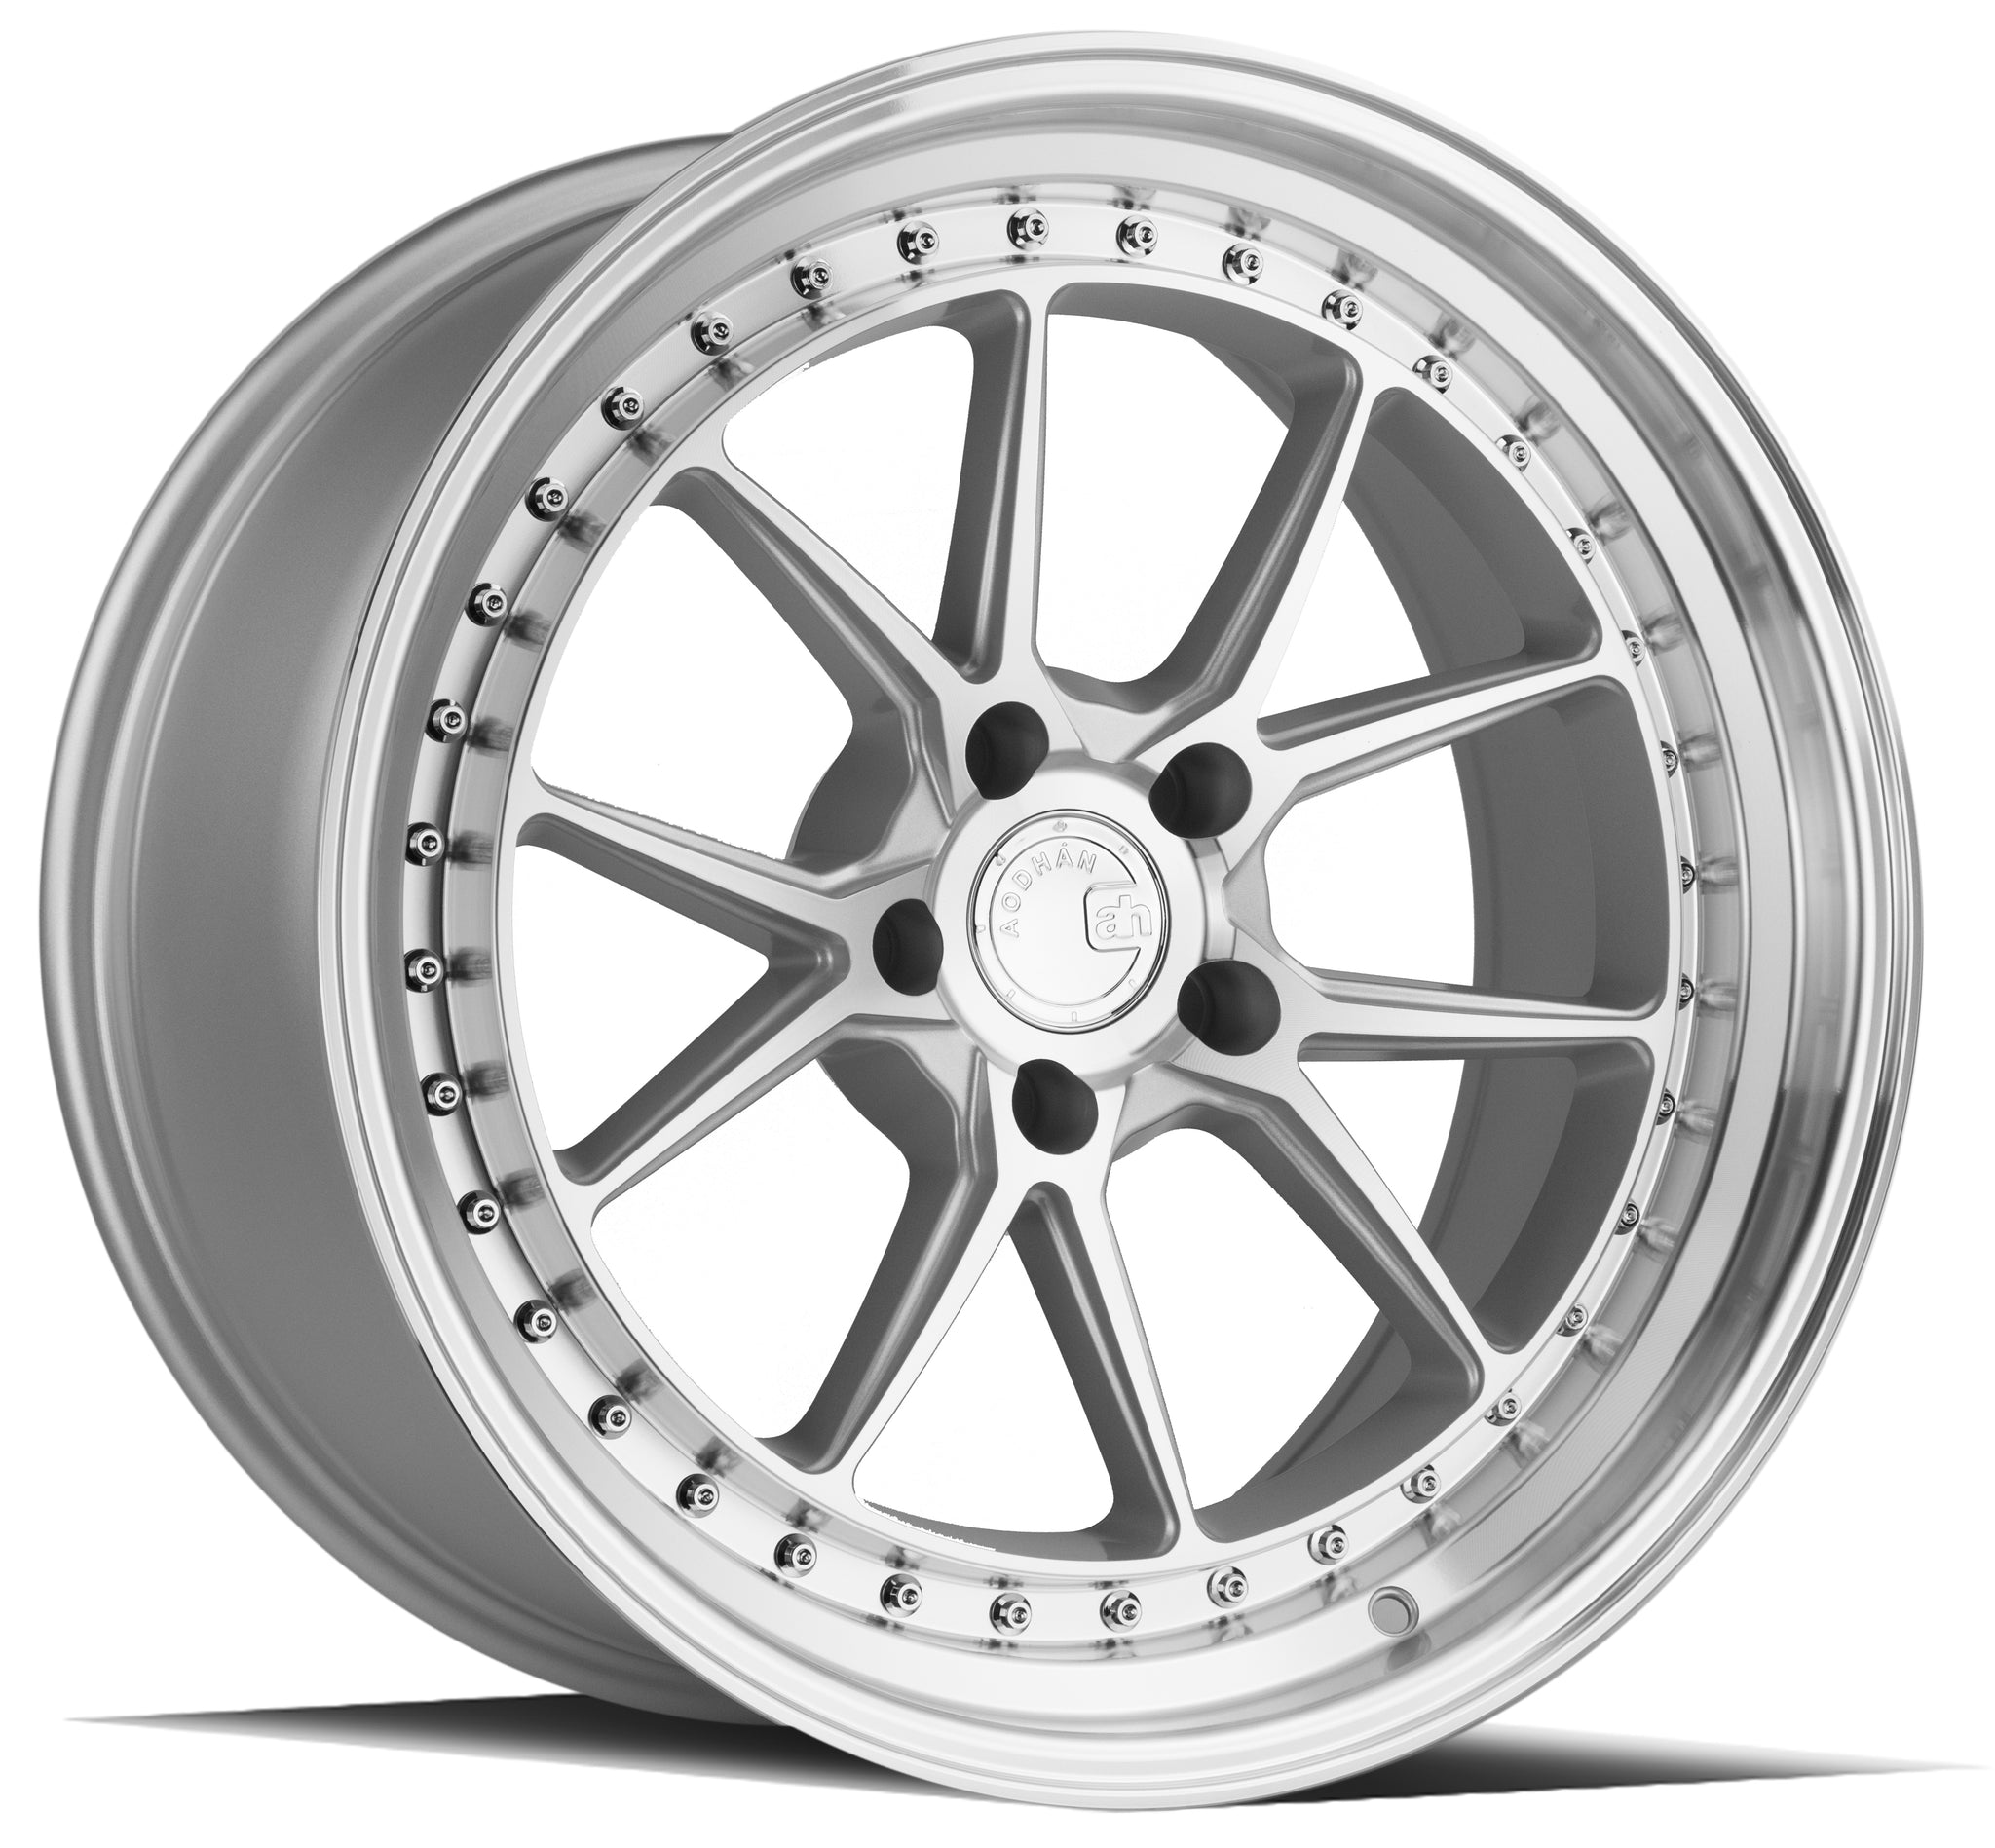 AODHAN DS08 SILVER WITH MACHINED FACE WHEELS | 19X9.5 | 5X120 | OFFSET: 35MM | CB: 72.6MM